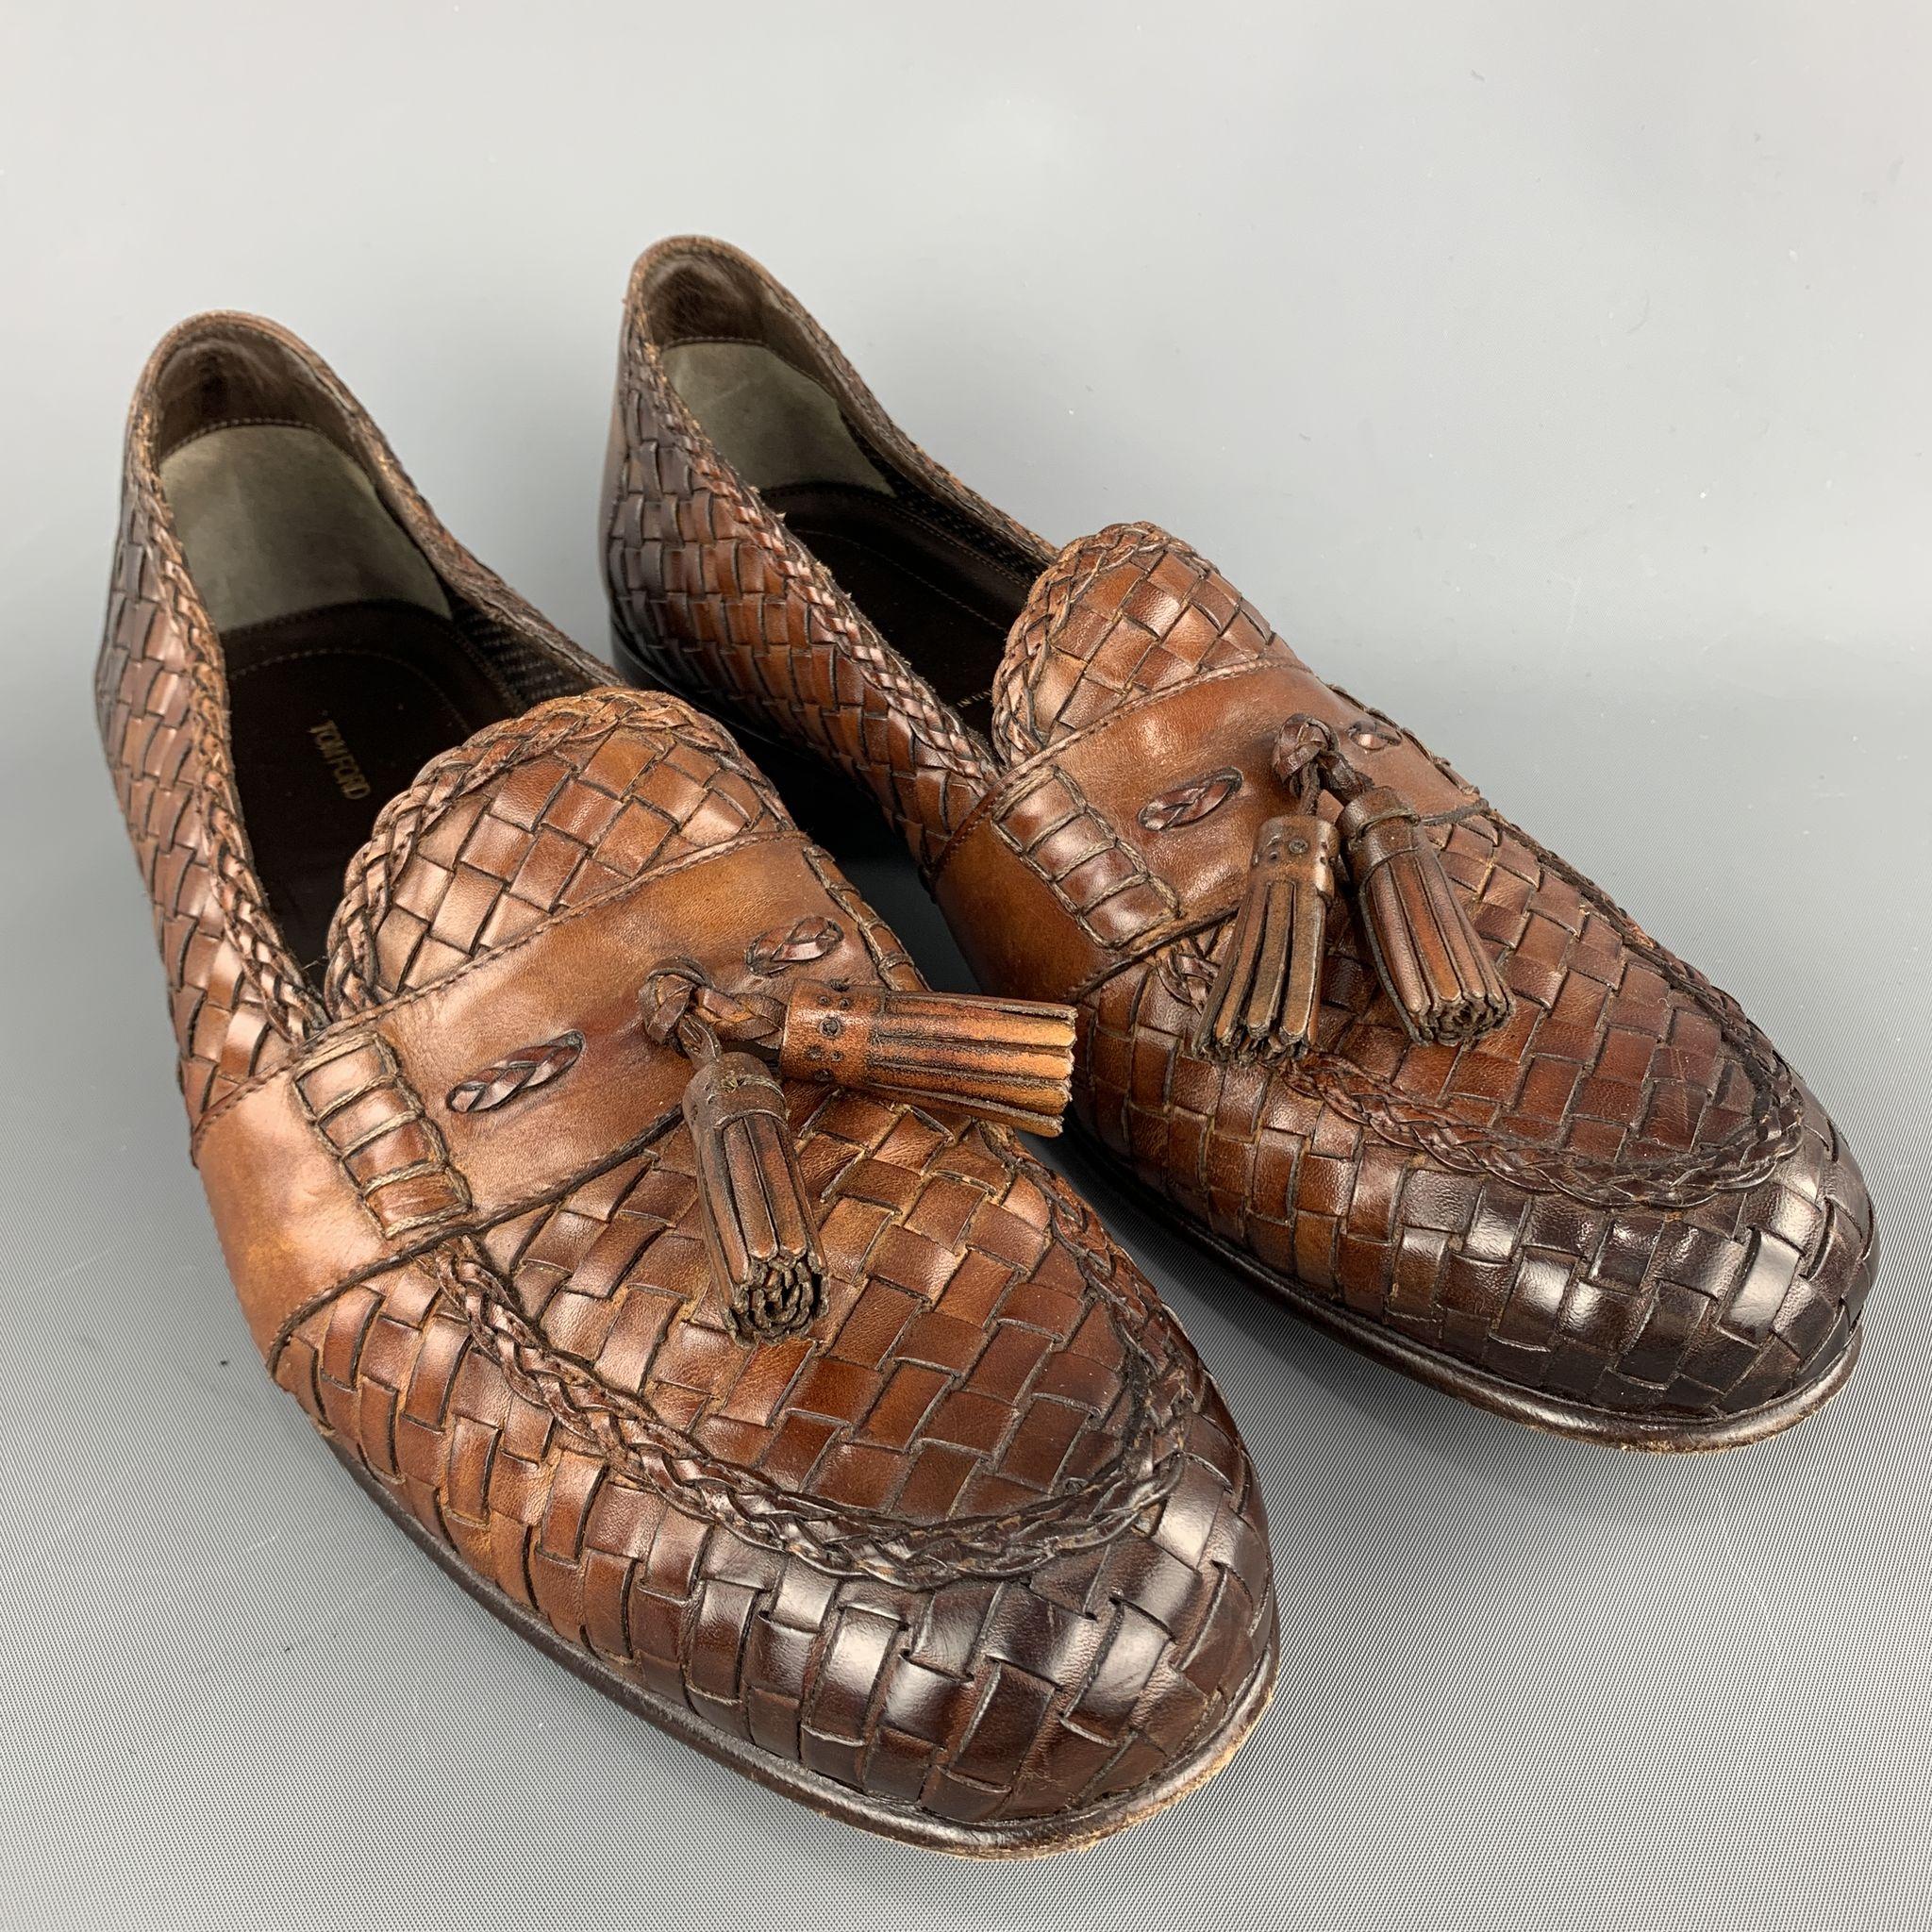 TOM FORD loafers comes in tan woven leather featuring a slip on style, front tassel details, and a wooden heel. Made in Italy.

Excellent Pre-Owned Condition.
Marked: 11 T

Outsole: 4 in. x 12 in. 